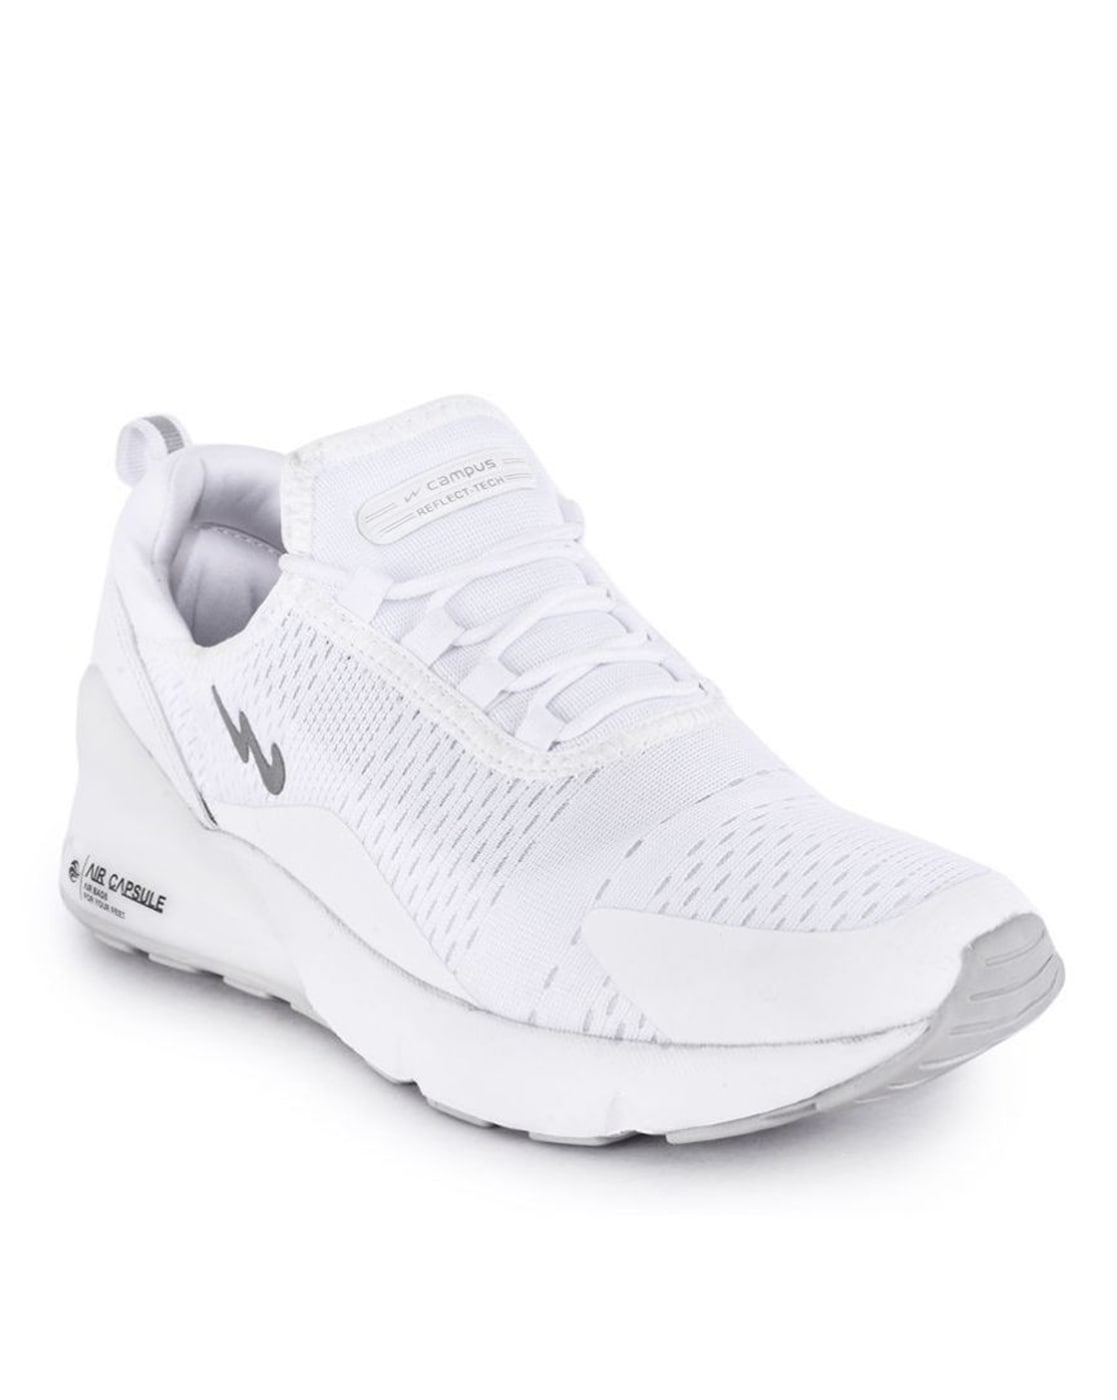 White Sports Shoes for Men by Campus 